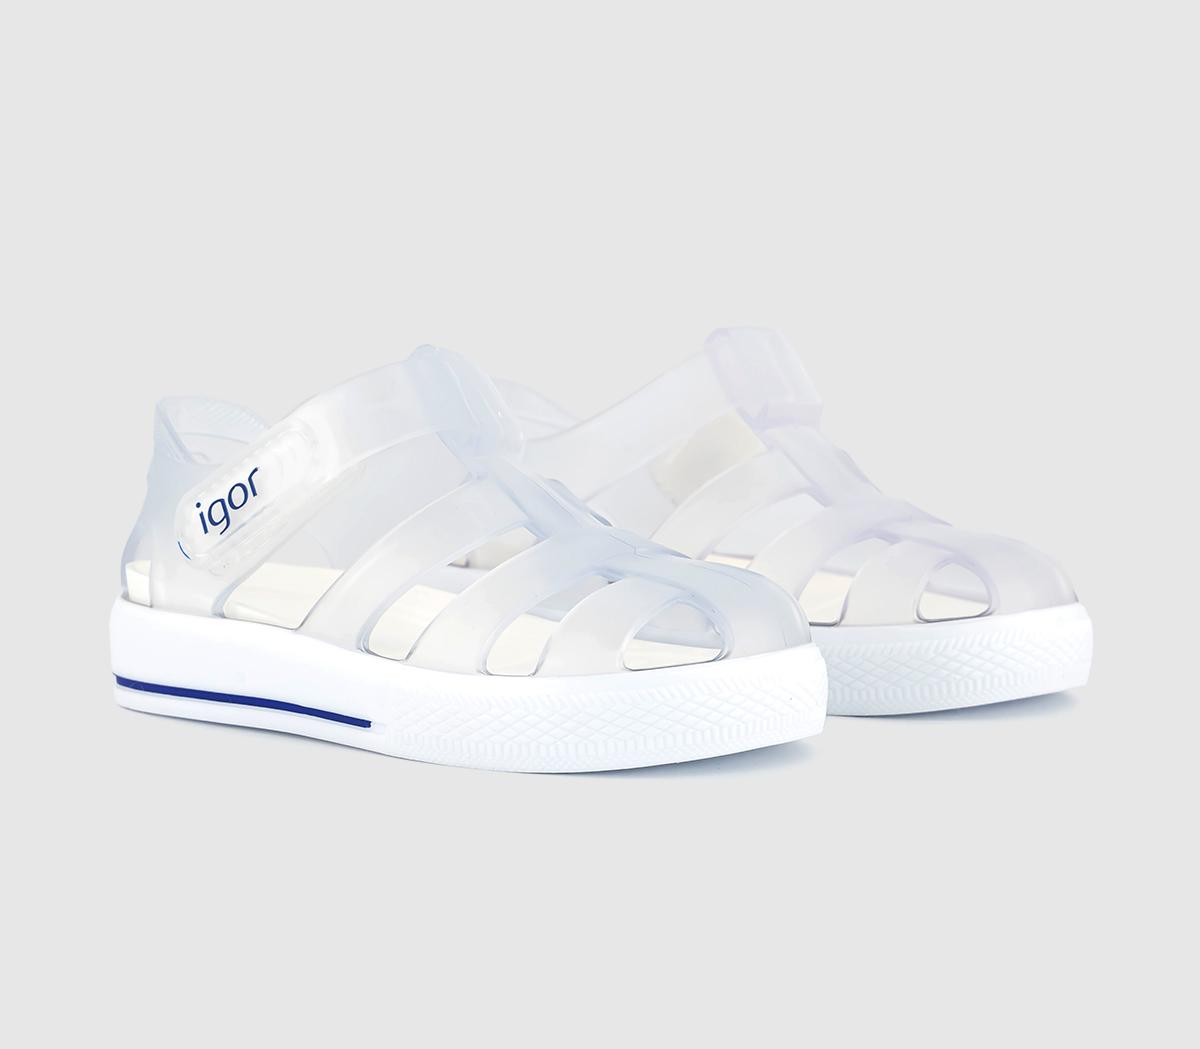 Igor Kids Clear White Star Summer Sandals, Perfect For The Hot Sand Or Poolside, Size: 9 Infant